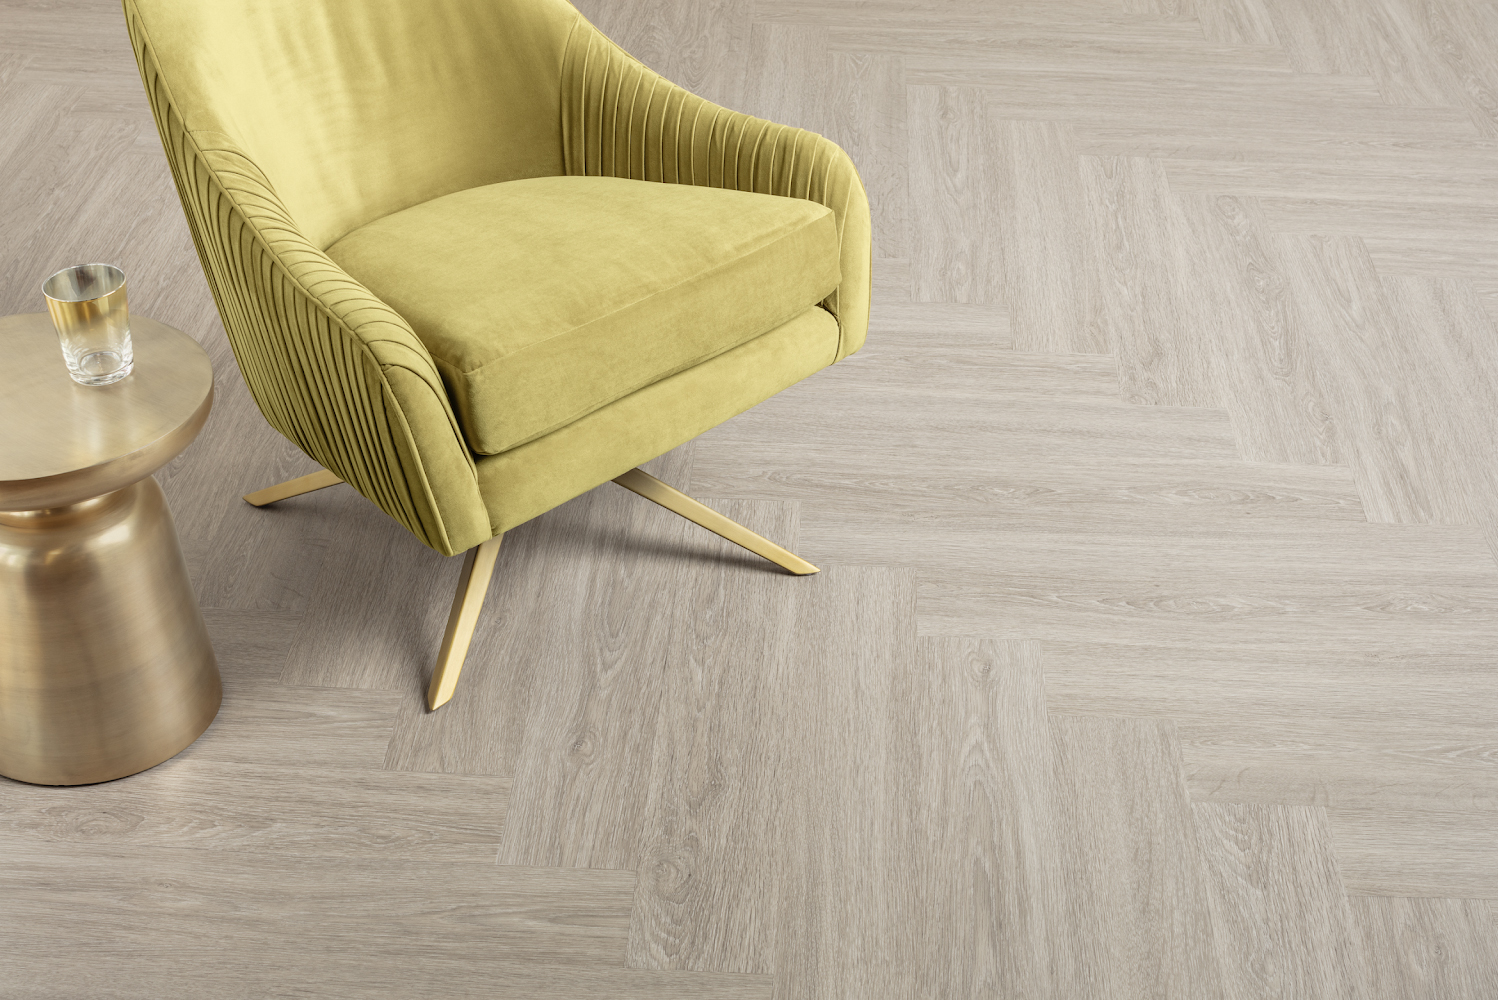 Parterre Flooring Systems launched Avara luxury vinyl floor and wall collection 